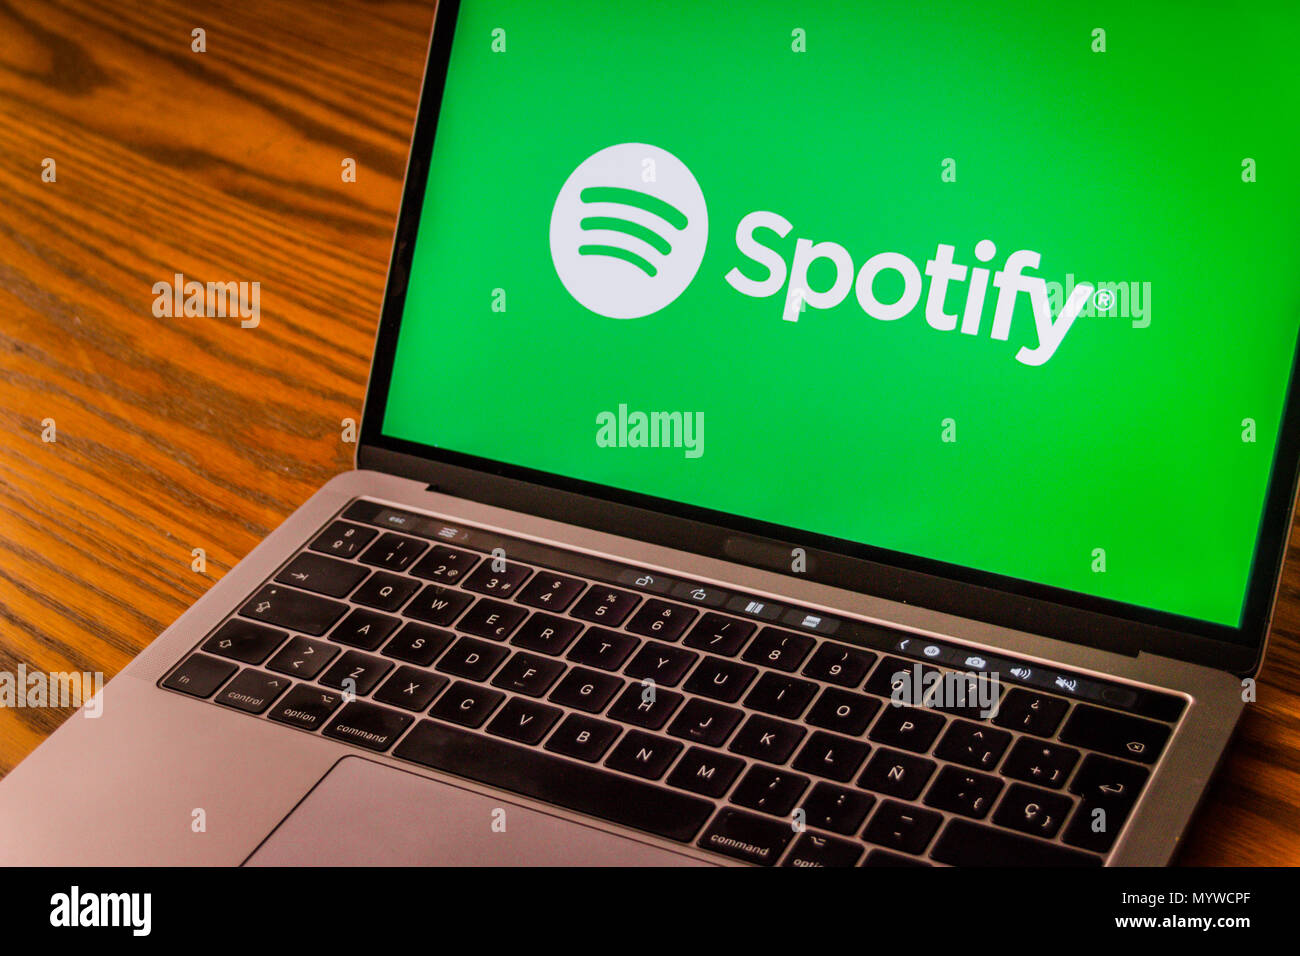 Dallas, Texas/ United States - 06/7/2018: (Photograph of the Spotify logo on computer screen) Stock Photo